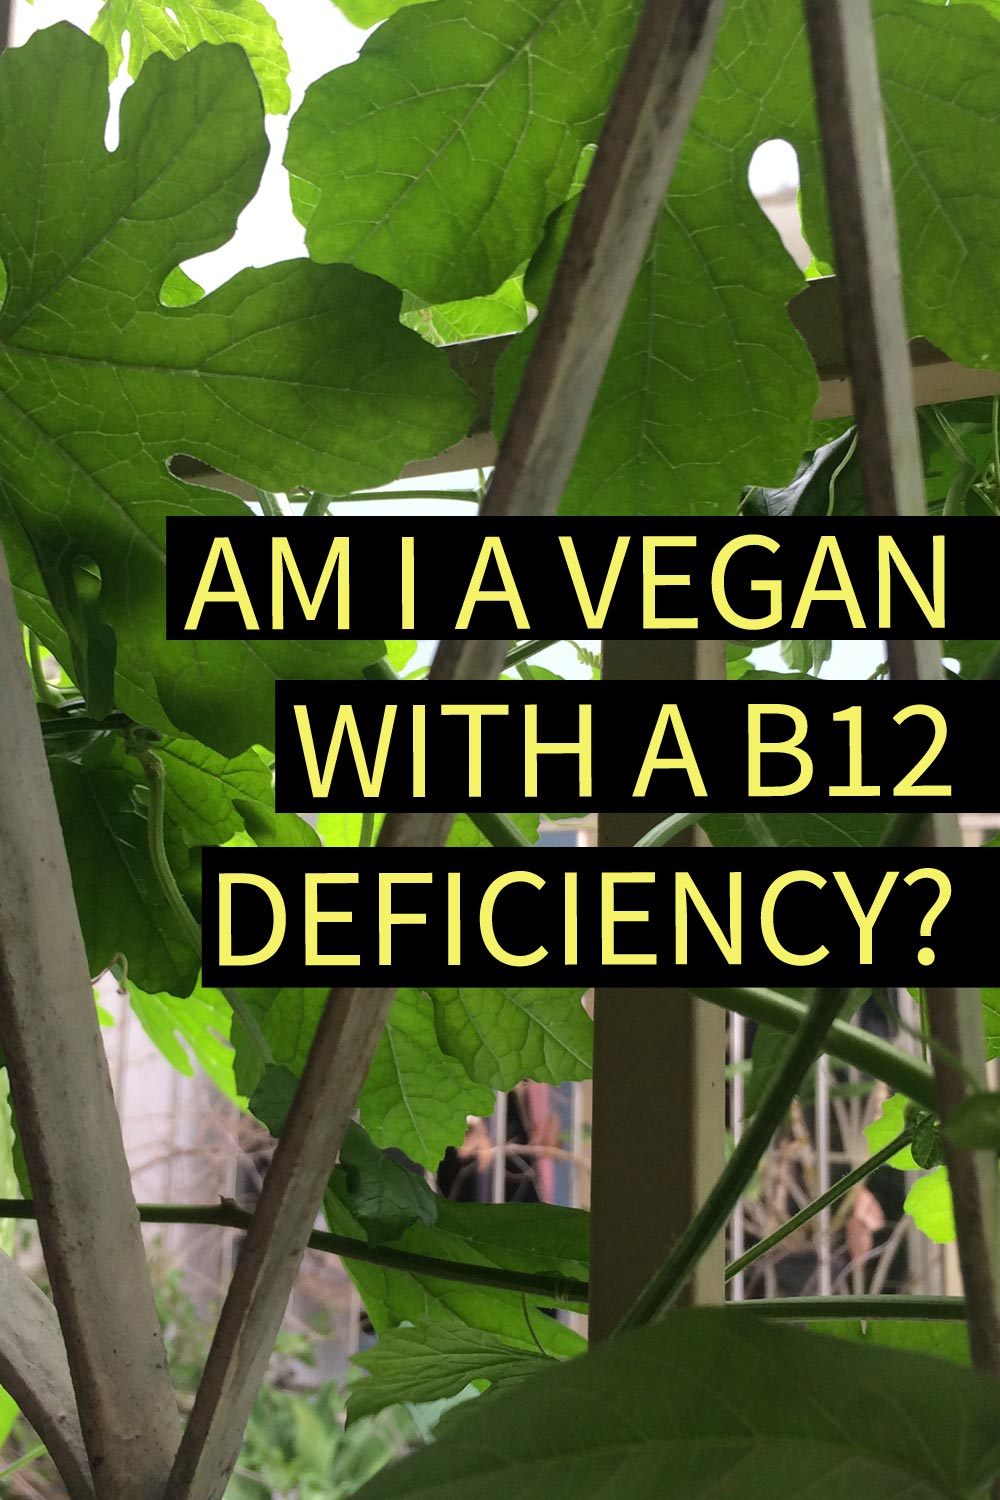 Image contains a photo of a fence covered in green leaves and vines. On top of the photo, there is yellow text that says "Am I A Vegan With A B12 Deficiency?" and black bars behind it.